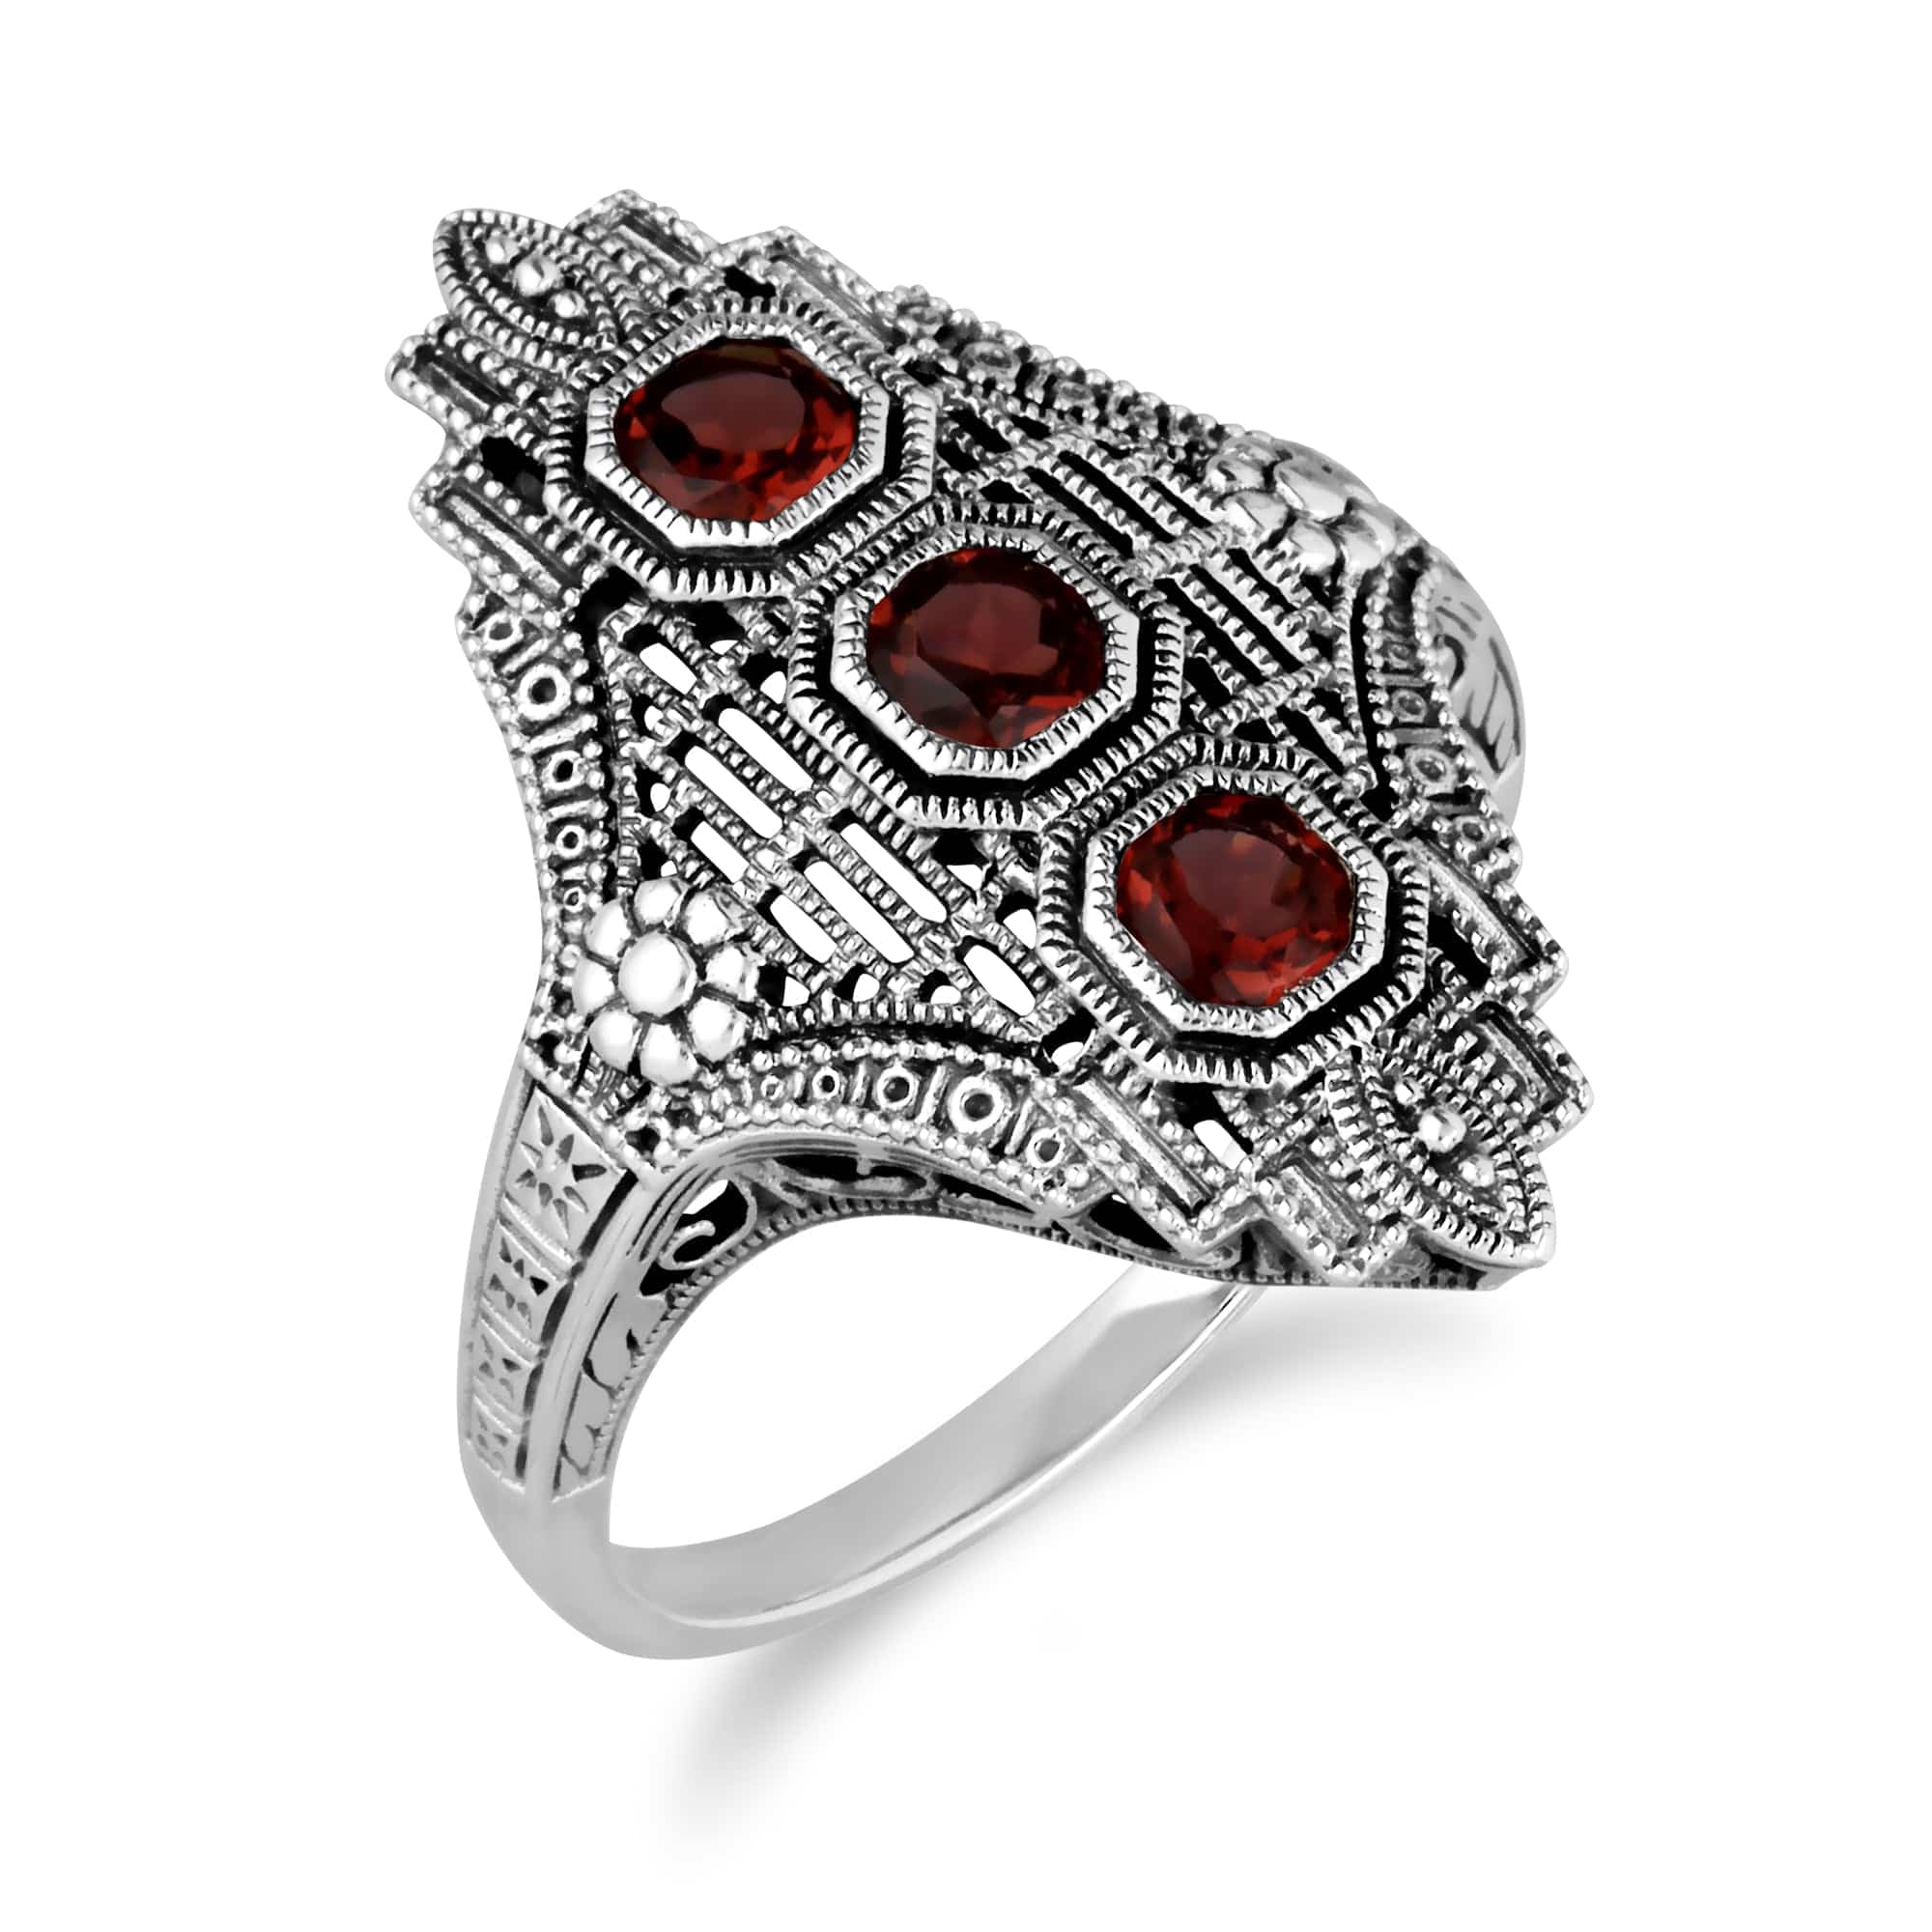 241R210501925 Art Nouveau Style Octagon Garnet Three Stone Filigree Statement Ring in 925 Sterling Silver 2